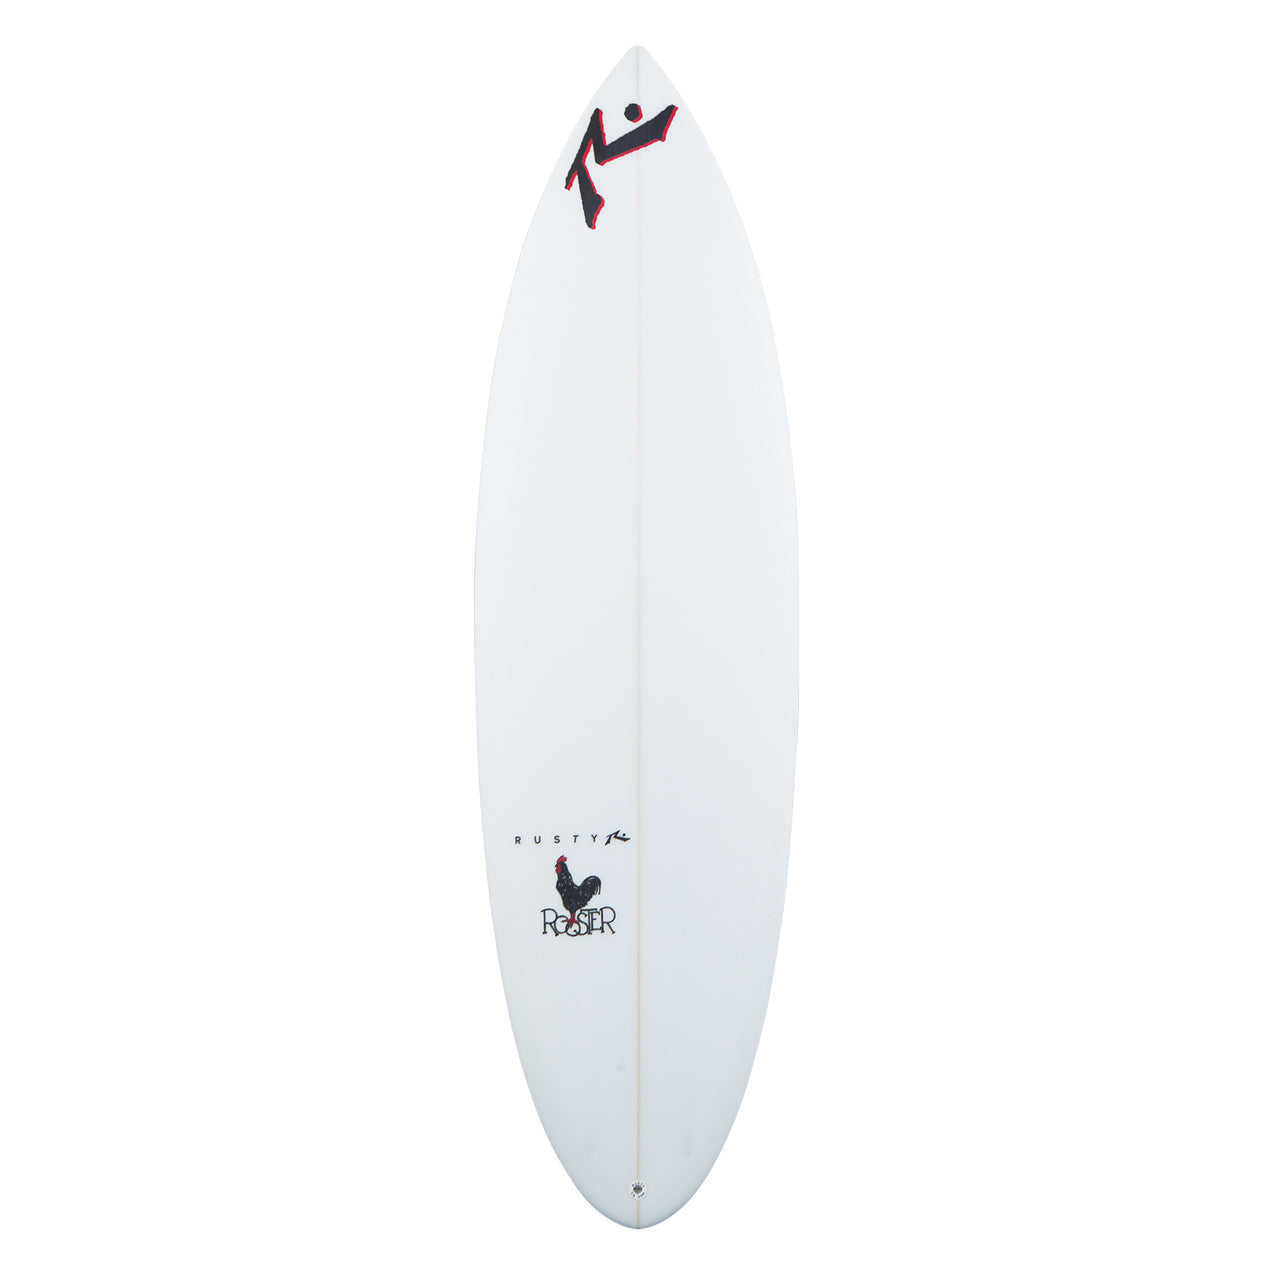 The Rooster - High Performance Shortboard - Rusty Surfboards - Top View